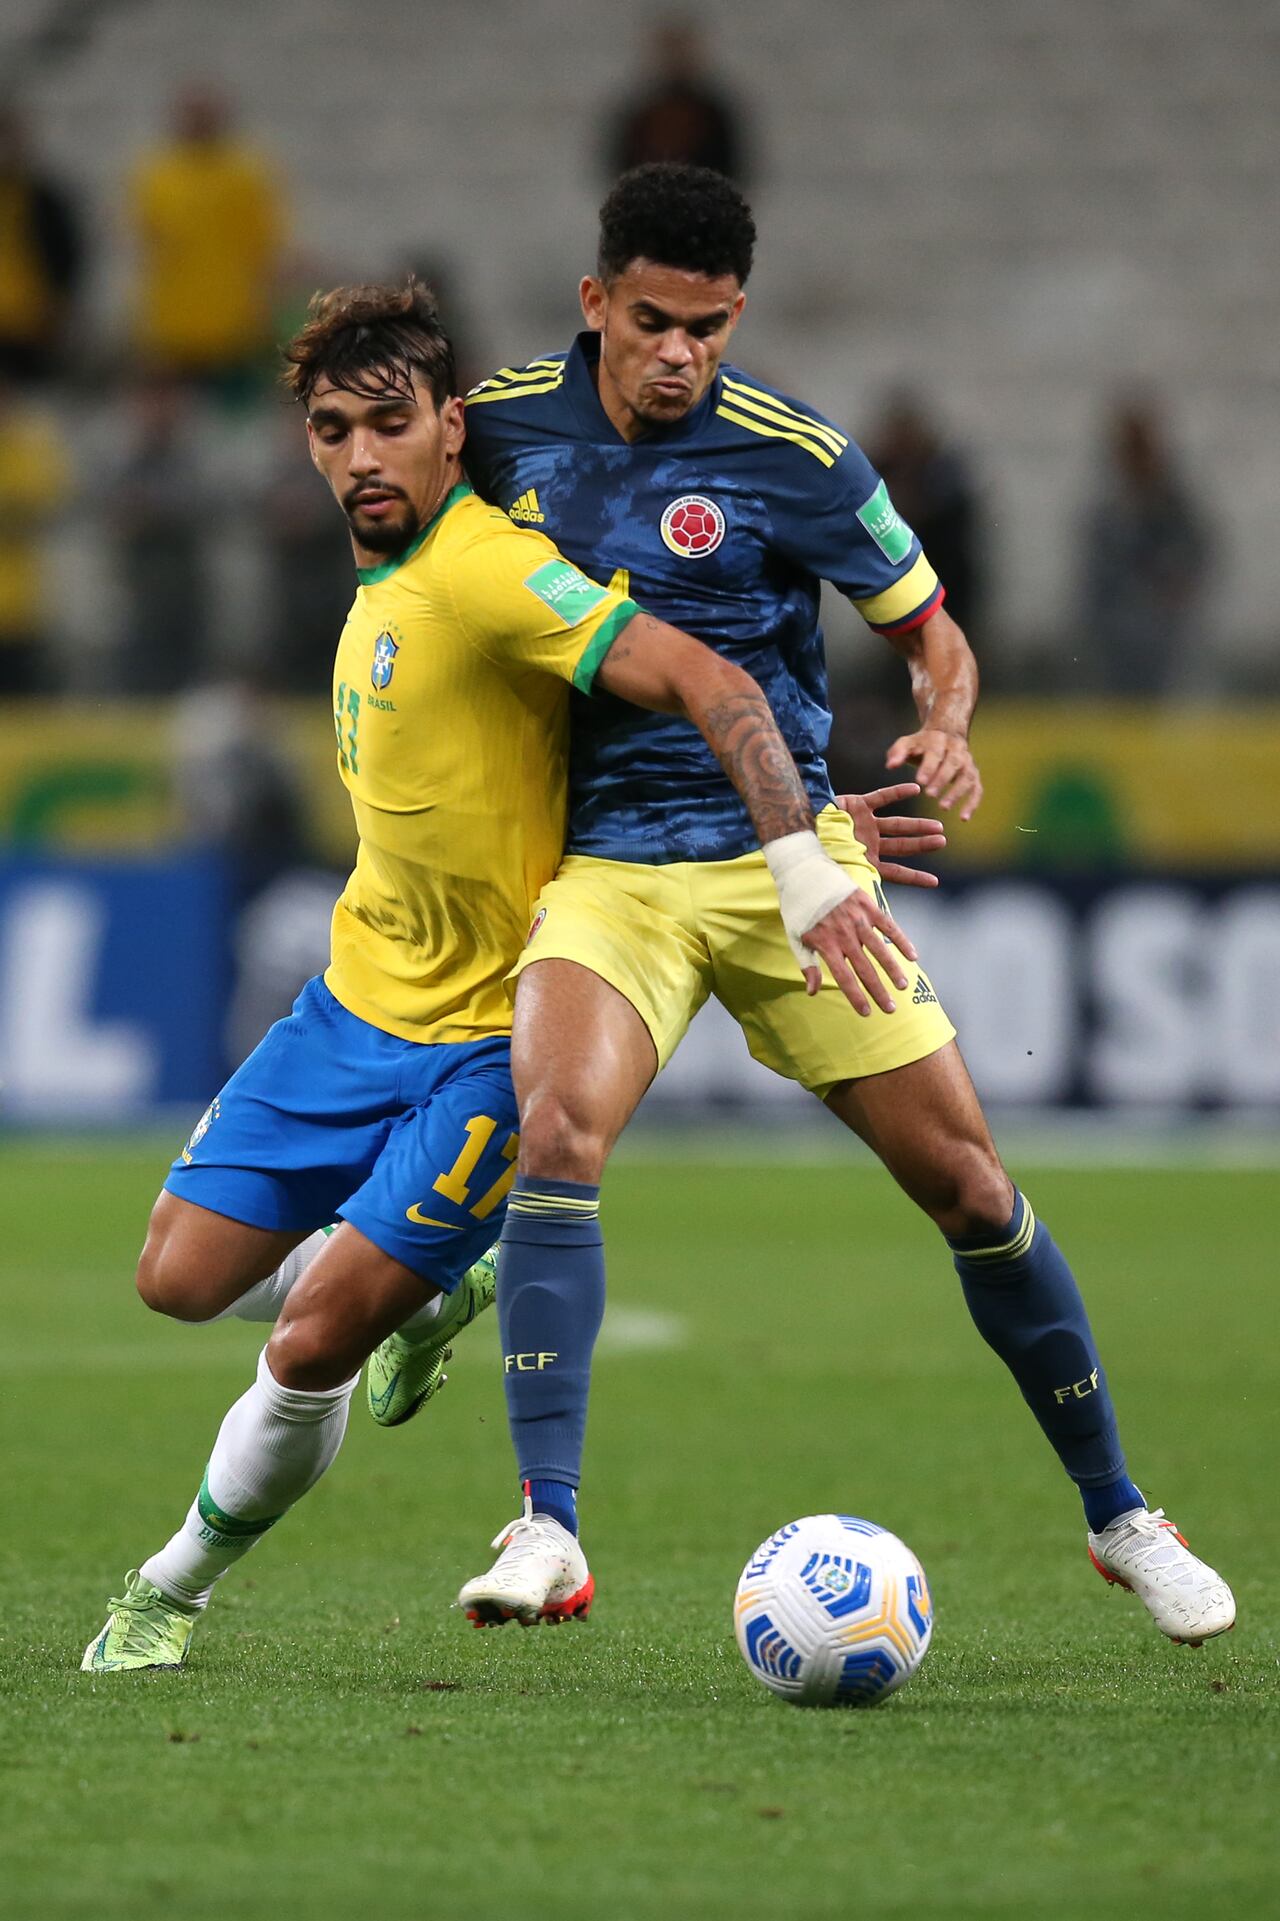 SAO PAULO, BRAZIL - NOVEMBER 11: Lucas Paquetá of Brazil fights for the ball with Luis Diaz of Colombia during a match between Brazil and Colombia as part of FIFA World Cup Qatar 2022 Qualifiers at Neo Quimica Arena on November 11, 2021 in Sao Paulo, Brazil. (Photo by Alexandre Schneider/Getty Images)